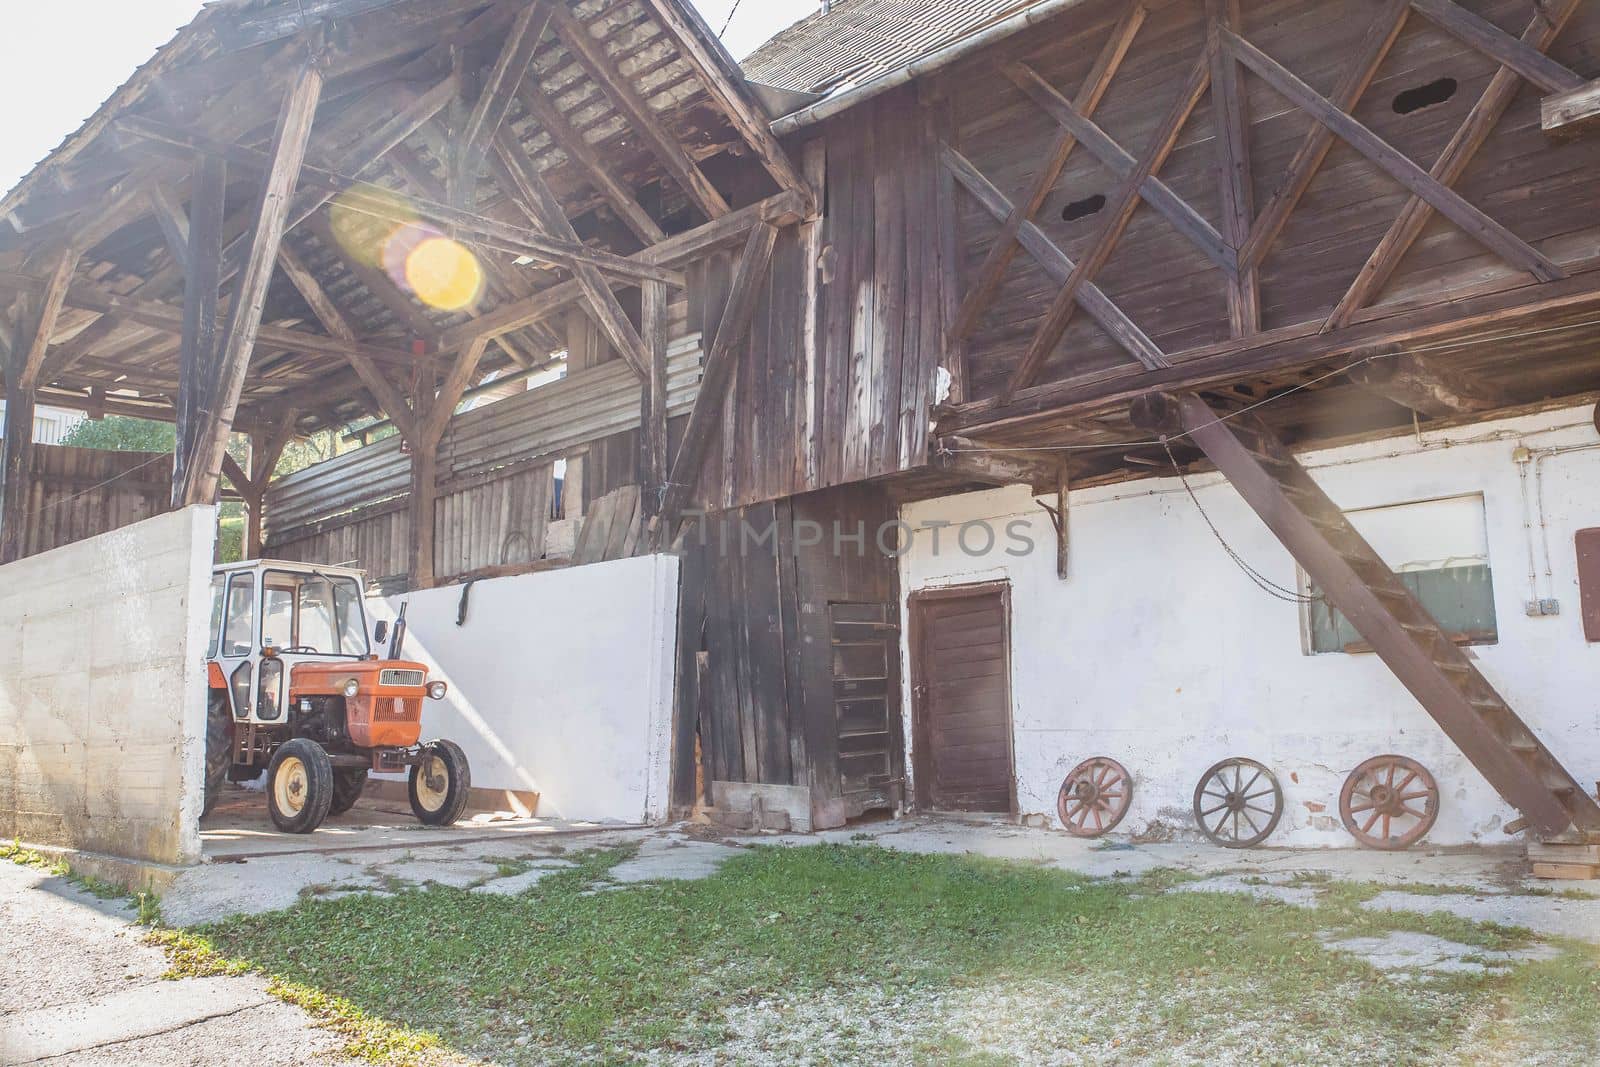 Old barn with a tractor in an Alpine village in Slovenia.